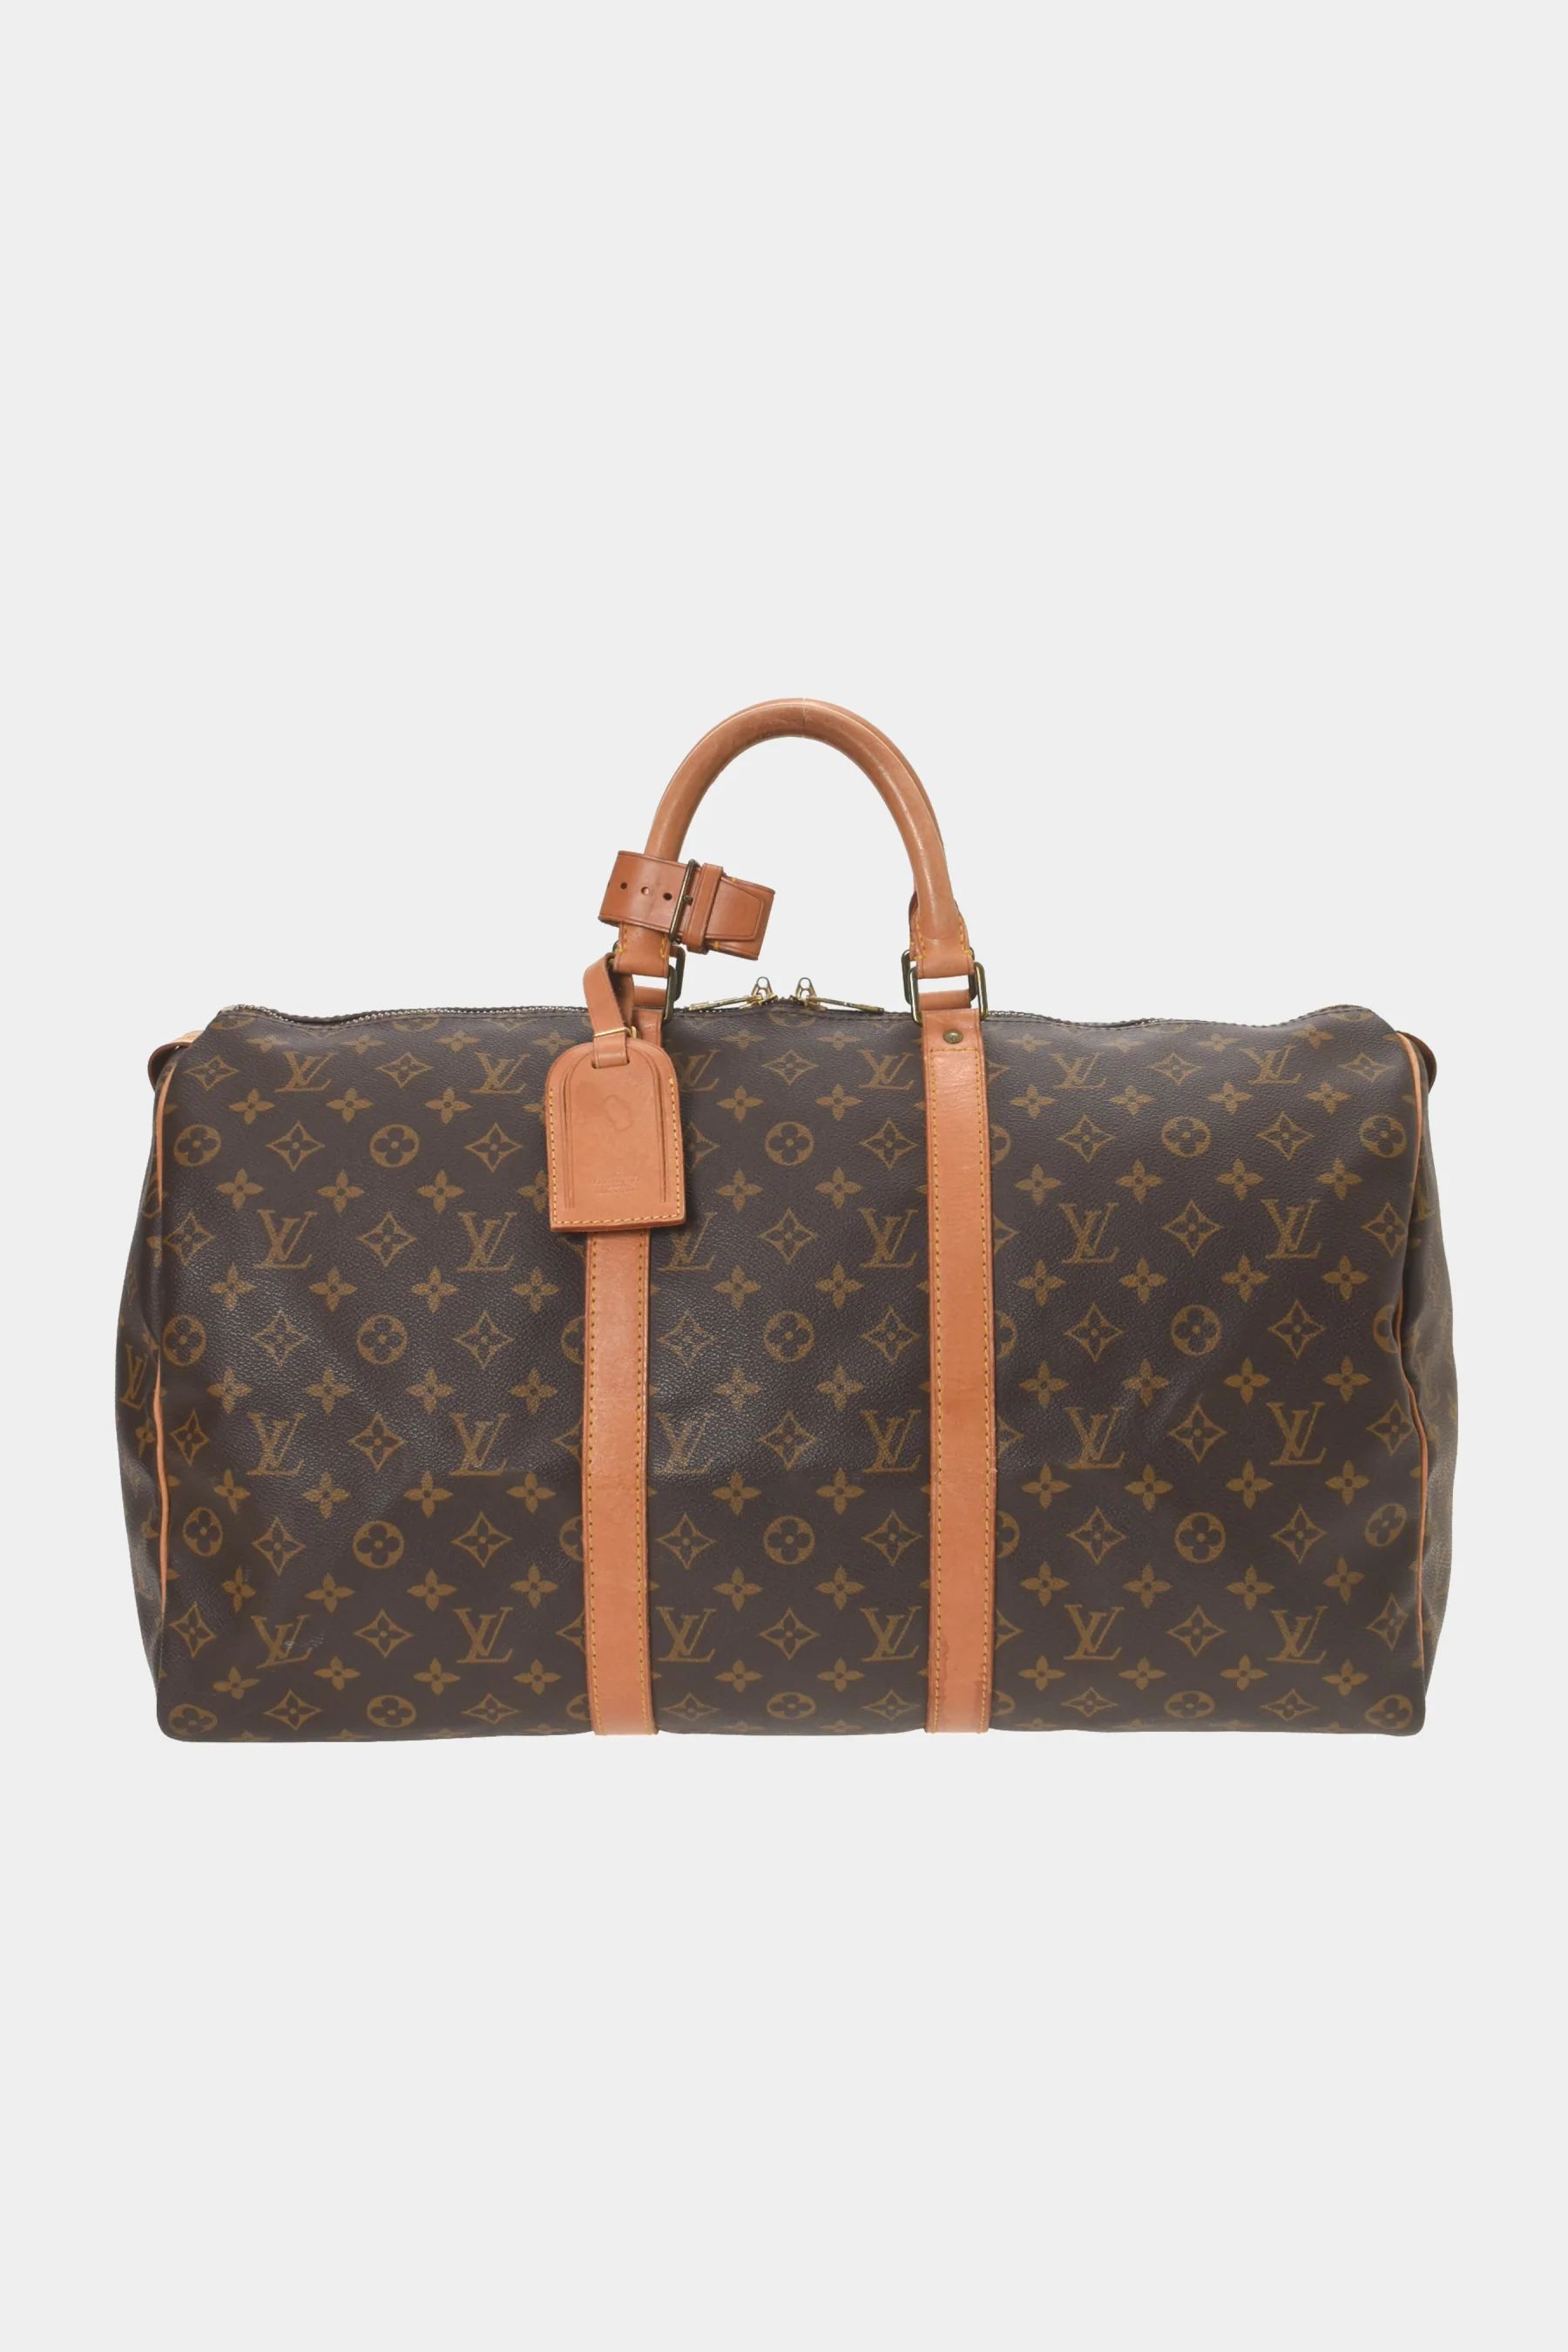 Louis Vuitton Keepall 50 Travel Bag in Brown Lord & Taylor | Lord & Taylor